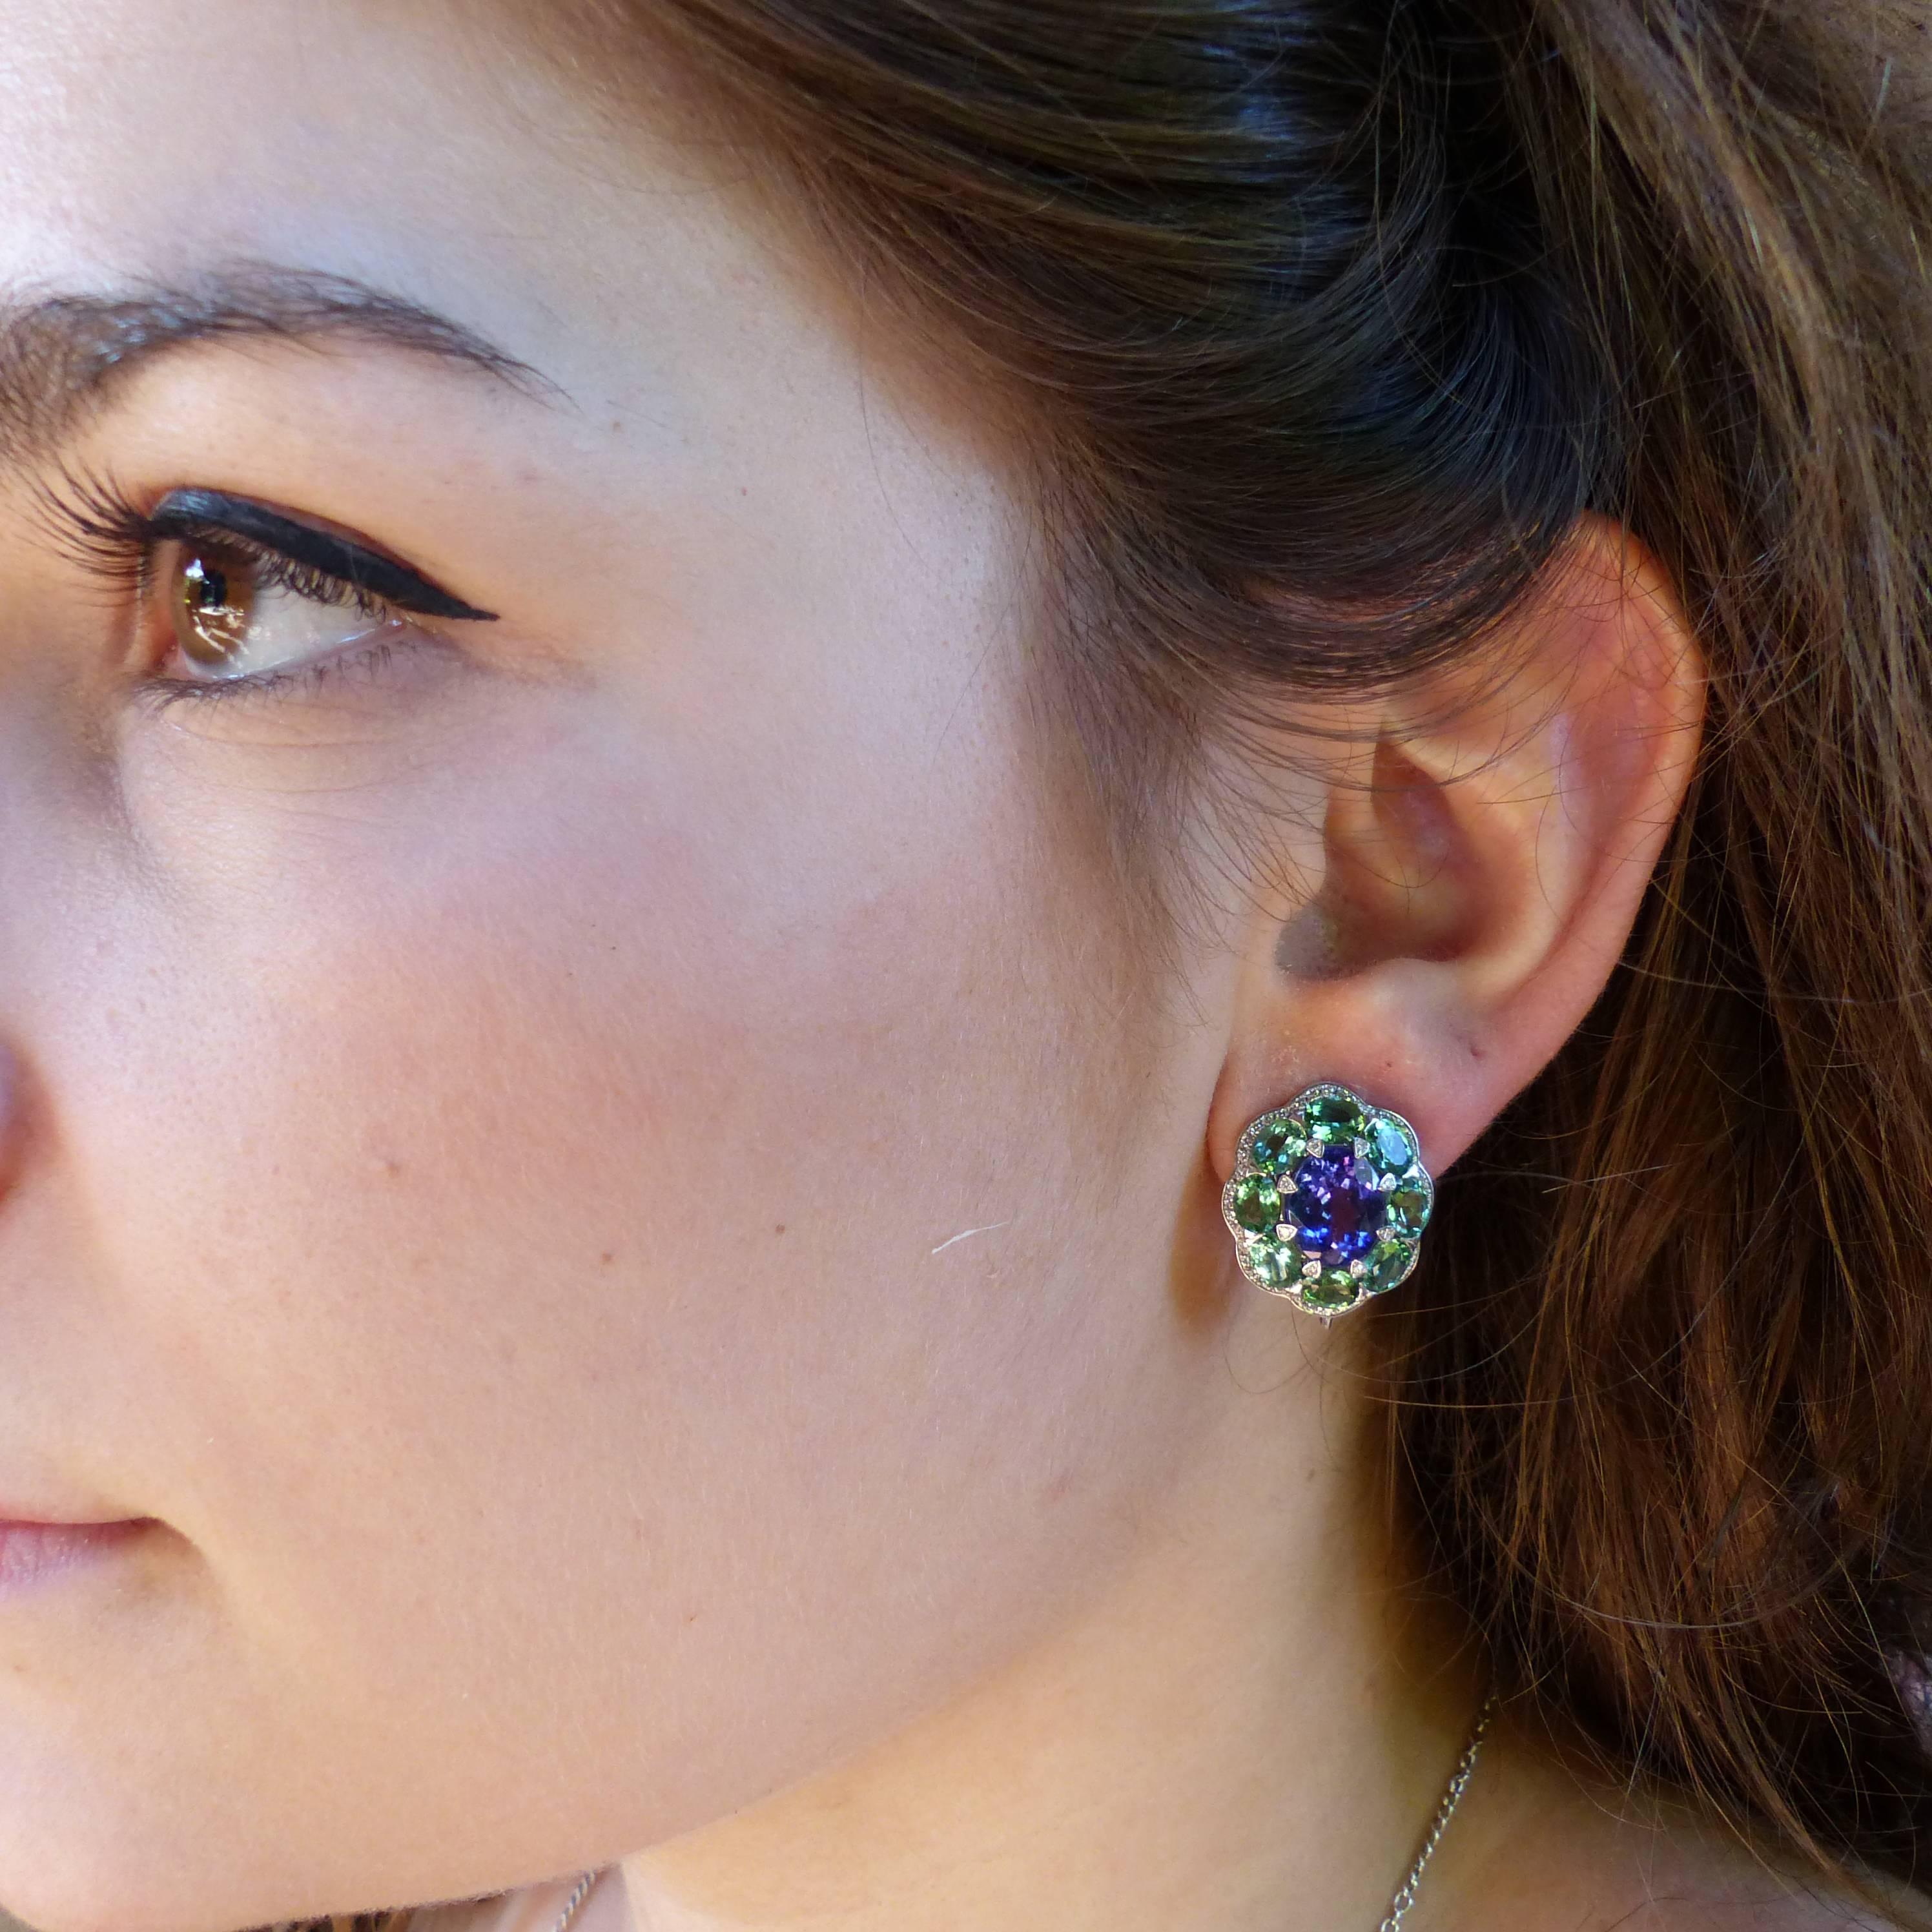 Thomas Leyser is renowned for his contemporary jewellery designs utilizing fine gemstones. 

These 18k white gold (15.01g) earrings are set with 2x fine Tanzanites (facetted, oval, 10x8mm, 5.25ct) + 16x Tourmalines (facetted, oval, 5x4mm, 5.35ct) +